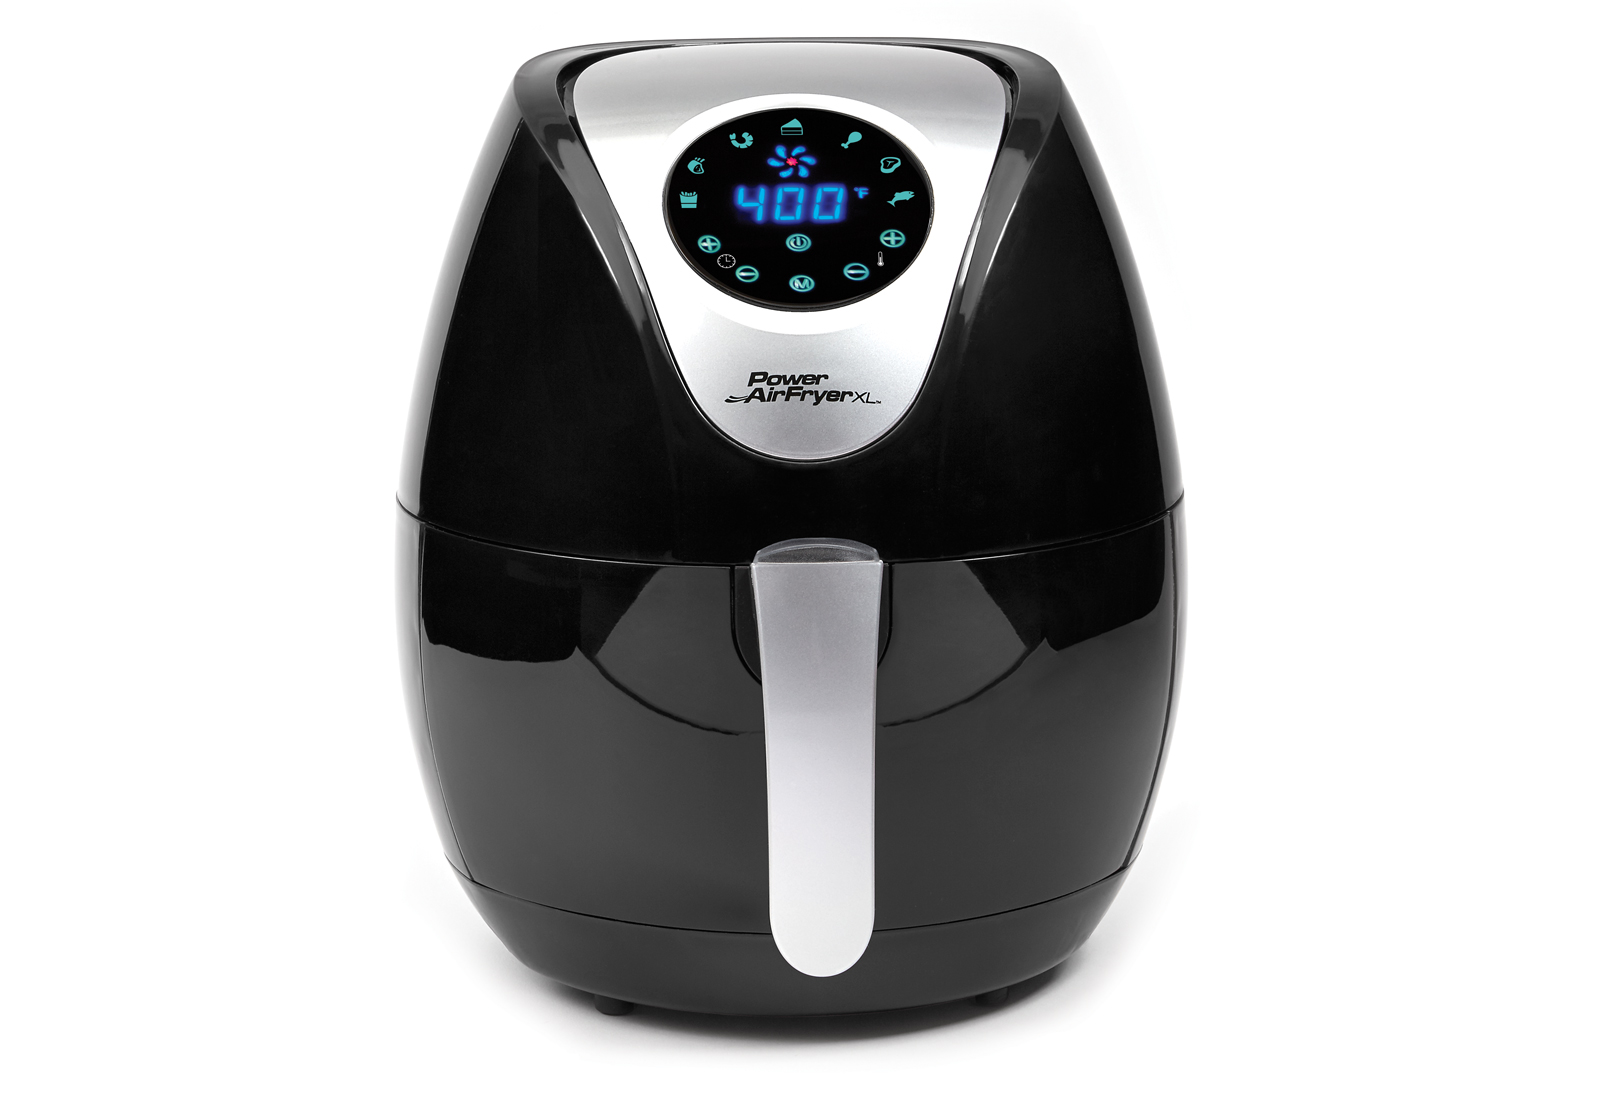 Power AirFryer XL 3.4qt Product Image